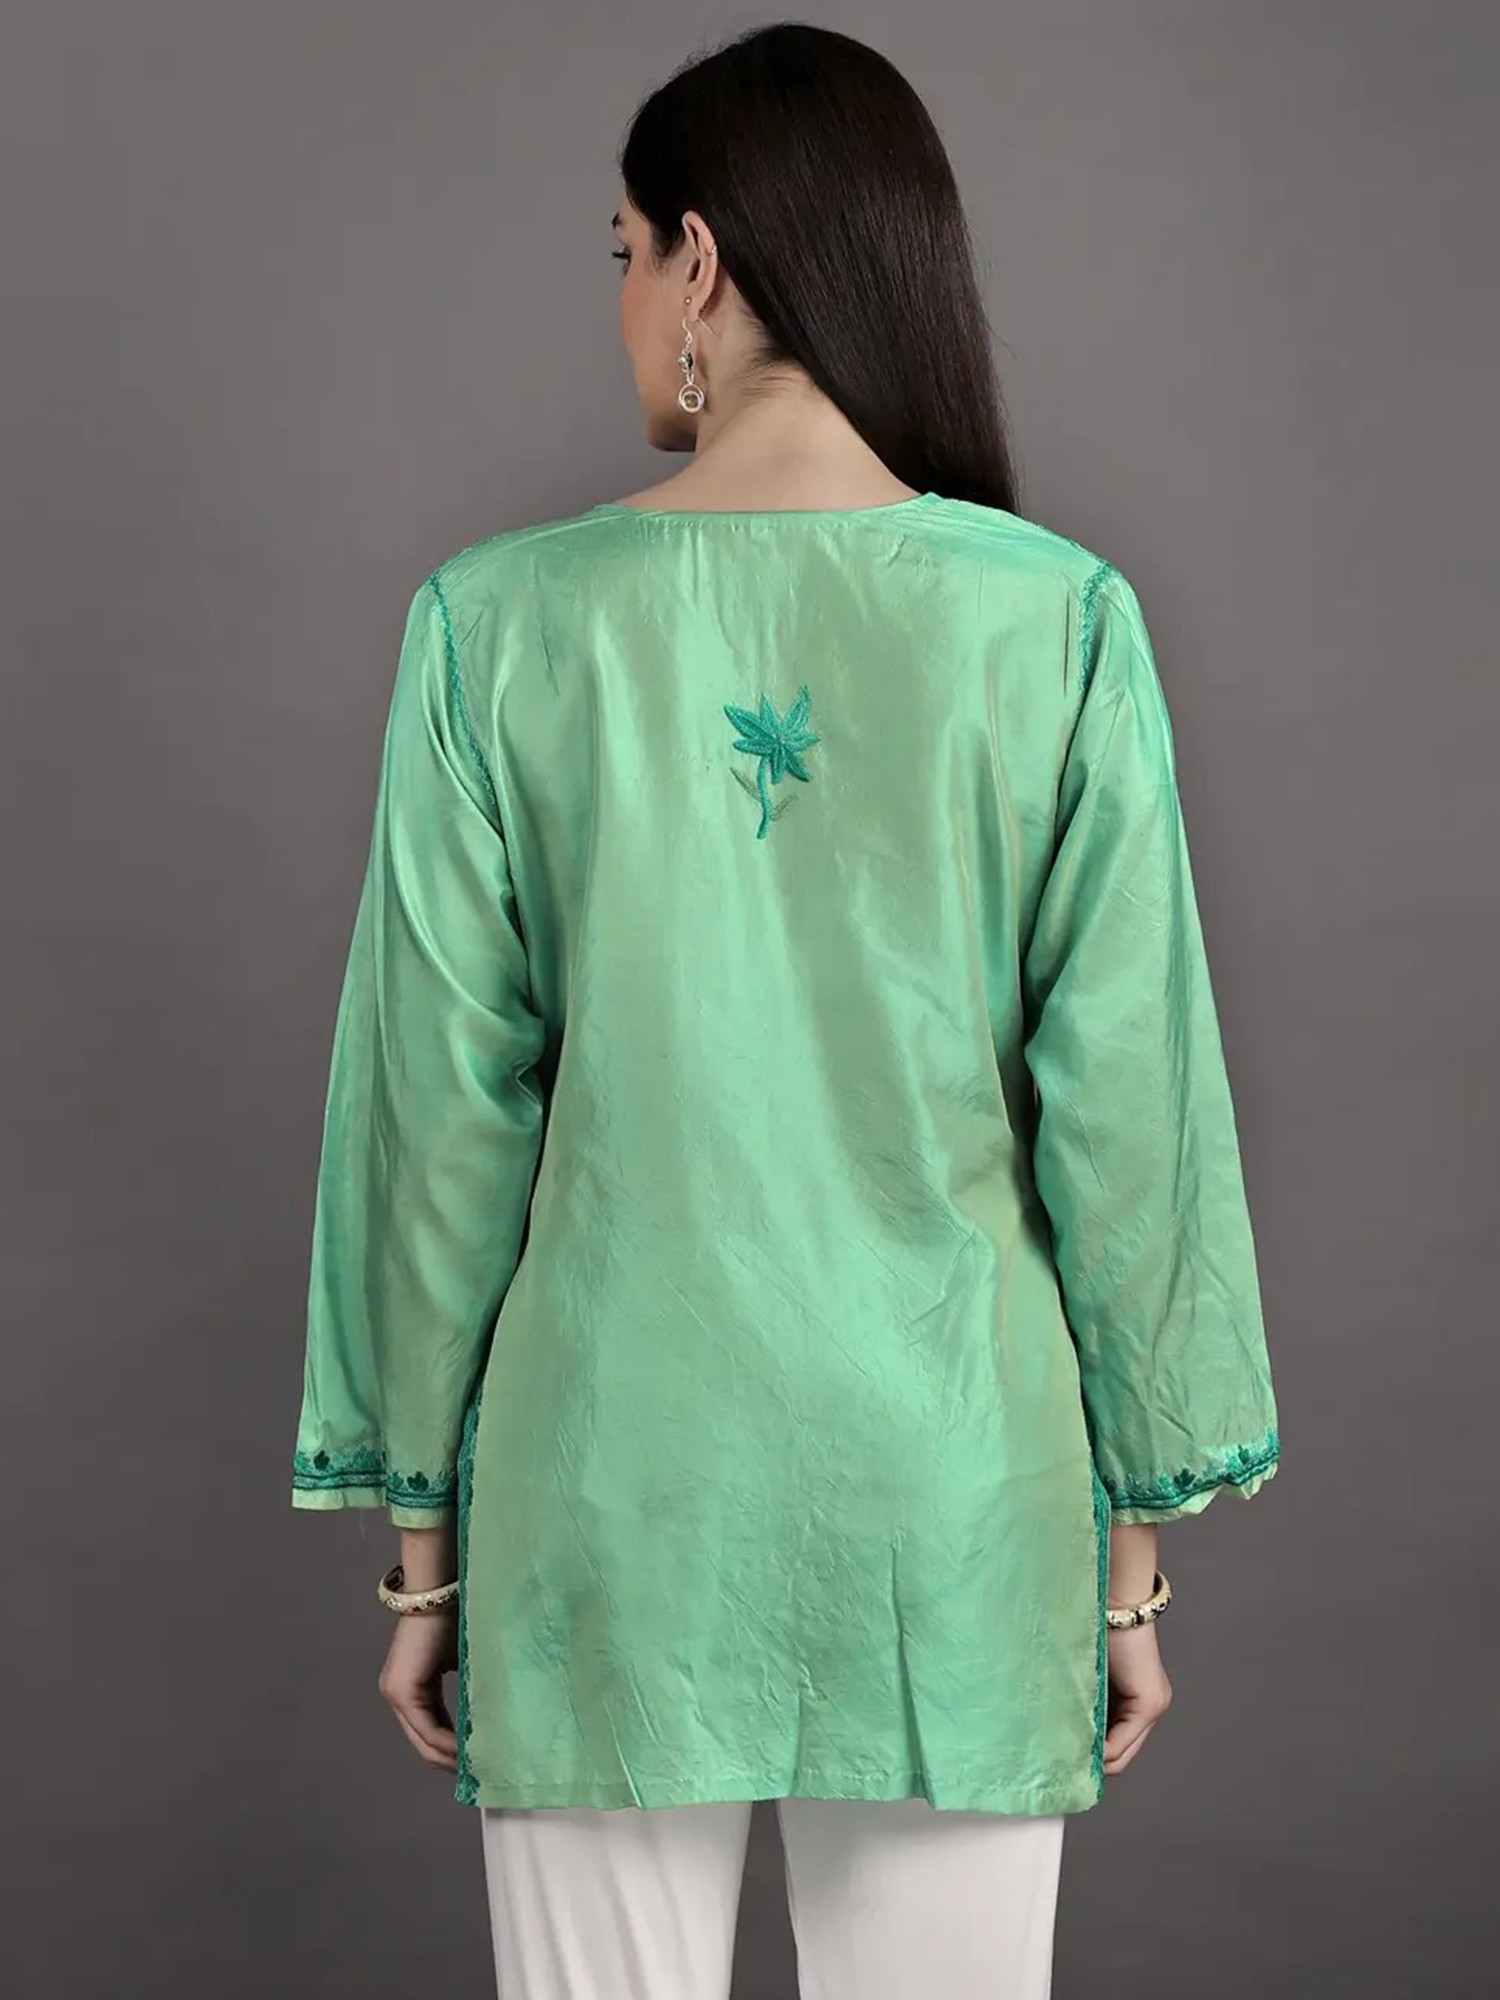 Rayon Full Sleeve Blue Kurti in Delhi at best price by Fashion Nova -  Justdial